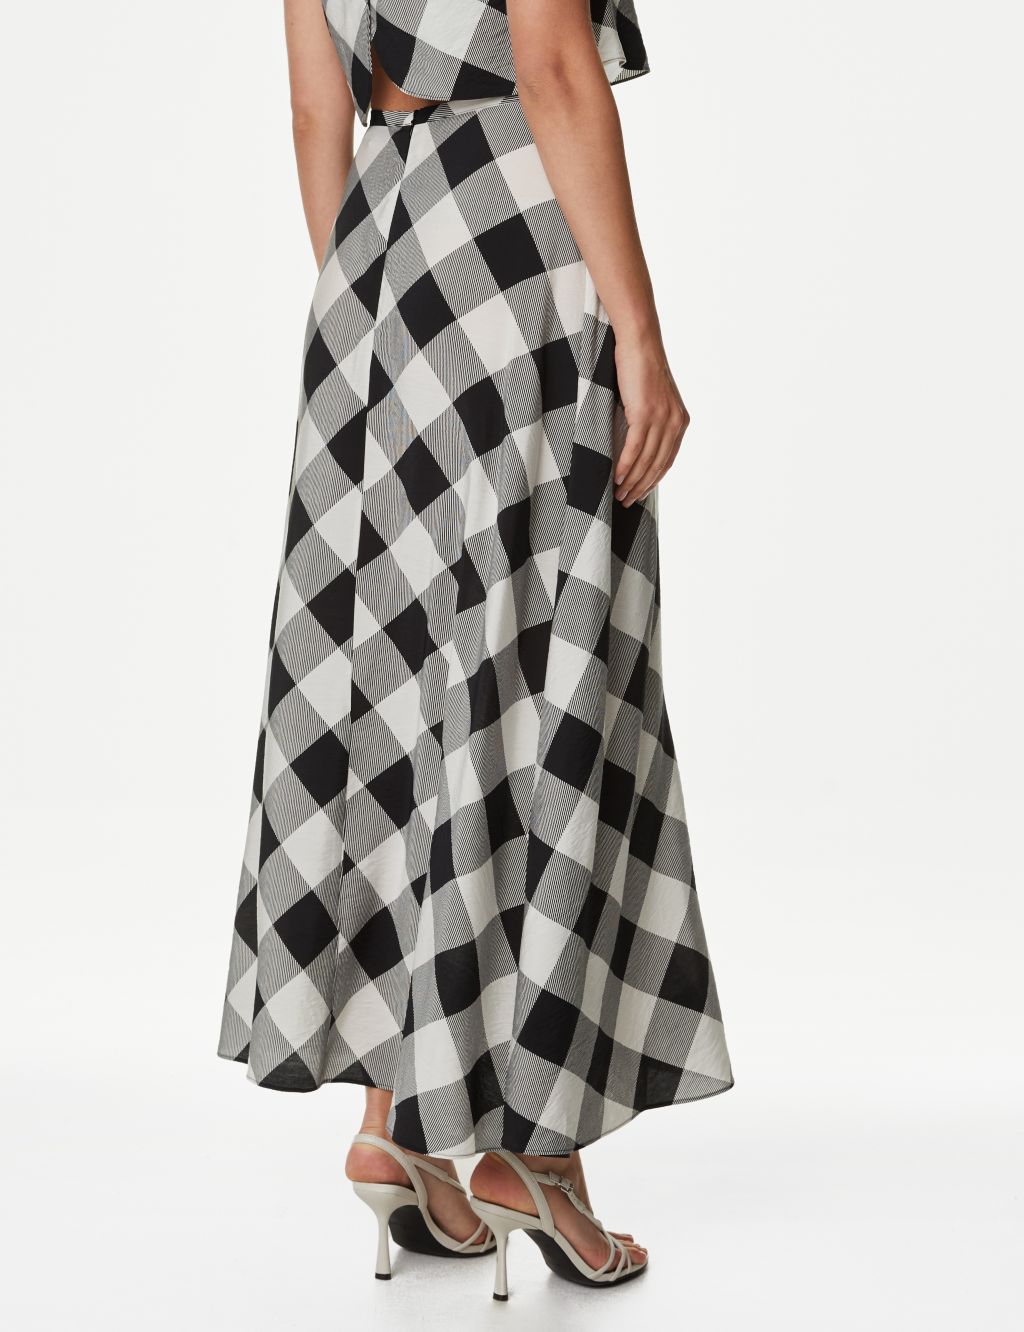 Checked Maxi A-Line Skirt image 6